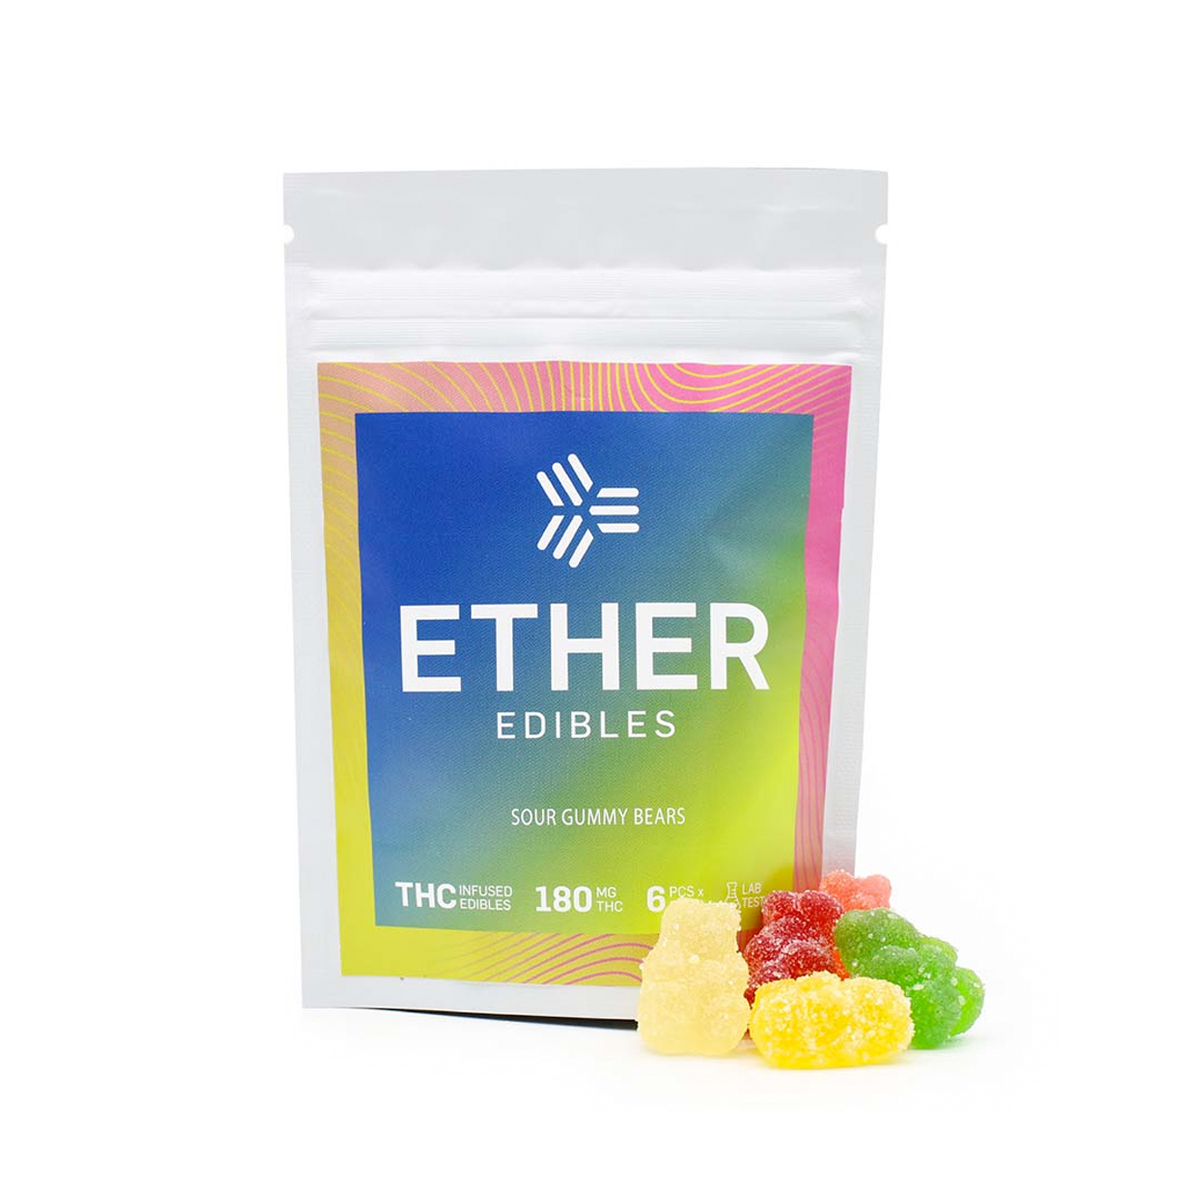 Buy Ether Edibles Sour Gummy Bears - 180mg online